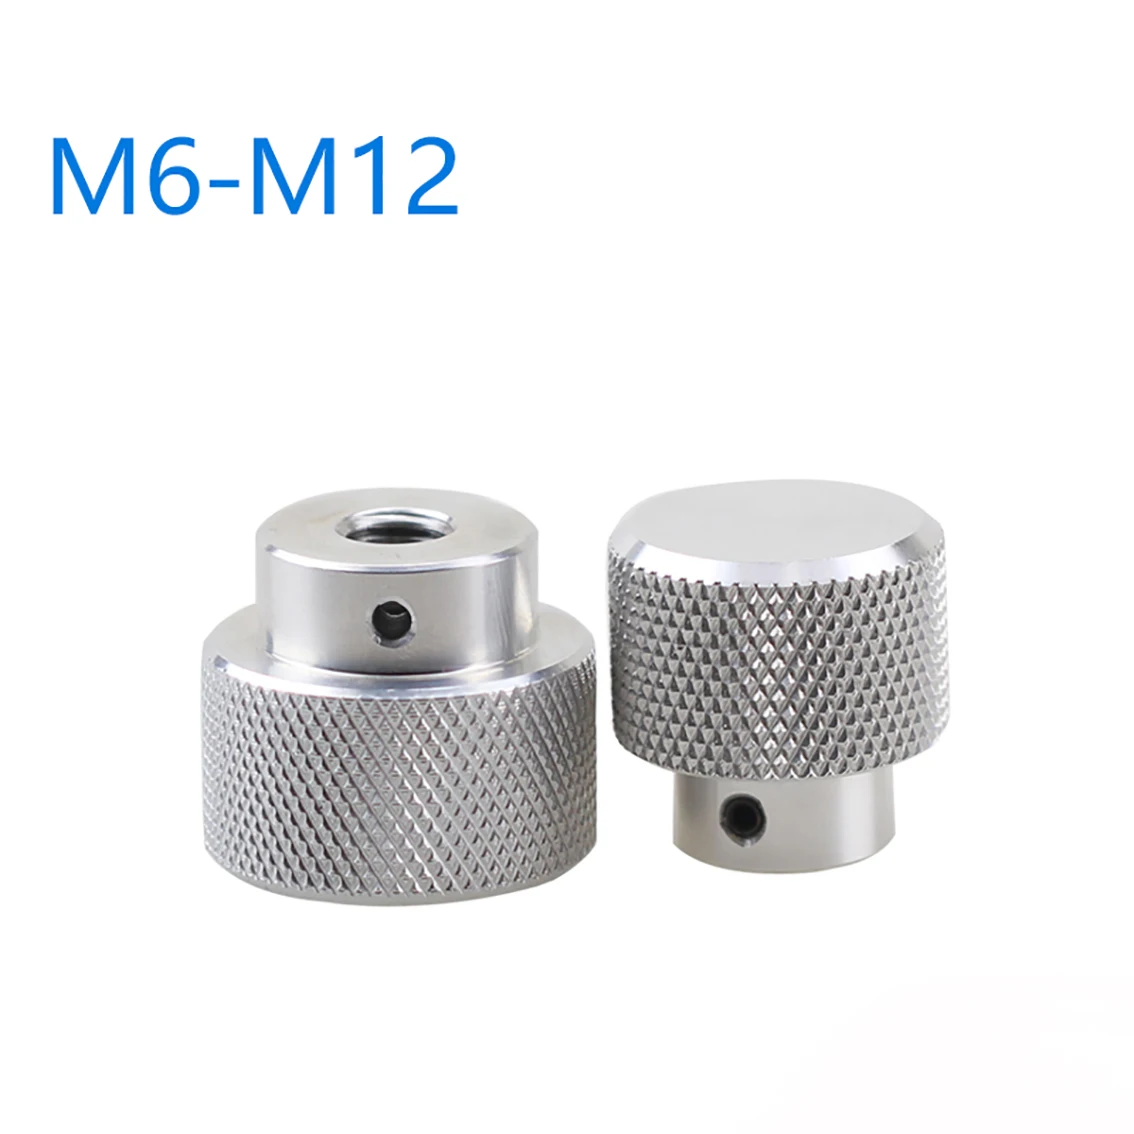 M6/8/10/12 Aluminium Blind Hole Knurled Thumb Nuts With Side Hand Grip Knobs Nut